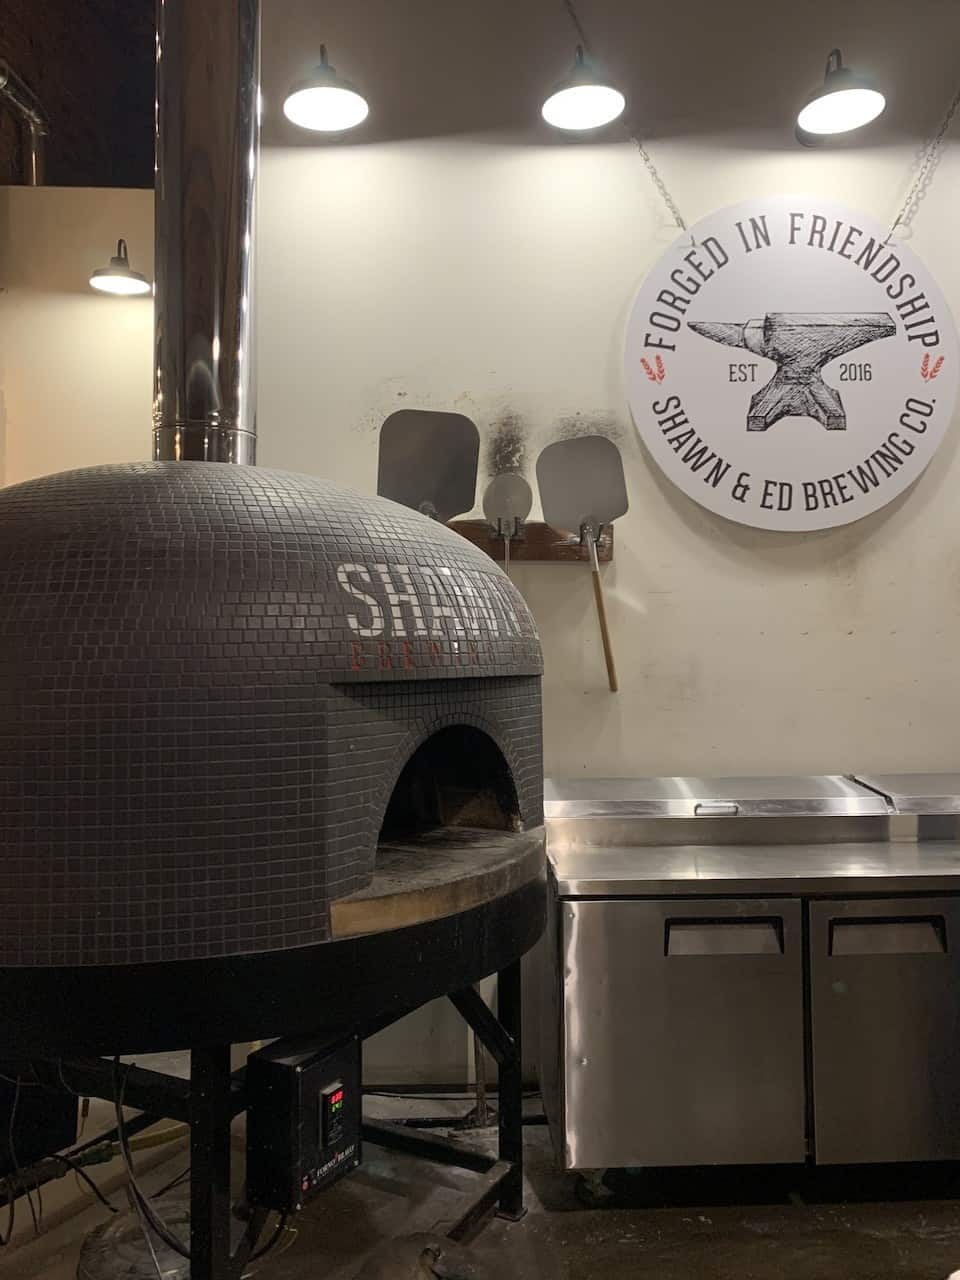 Wood Fired Pizza Oven at Shawn and Ed Brewing Company - The signature wood-fired pizzas at Shawn and Ed Brewing are one of the most popular items on the menu! They offer a wide variety of flavours and toppings.